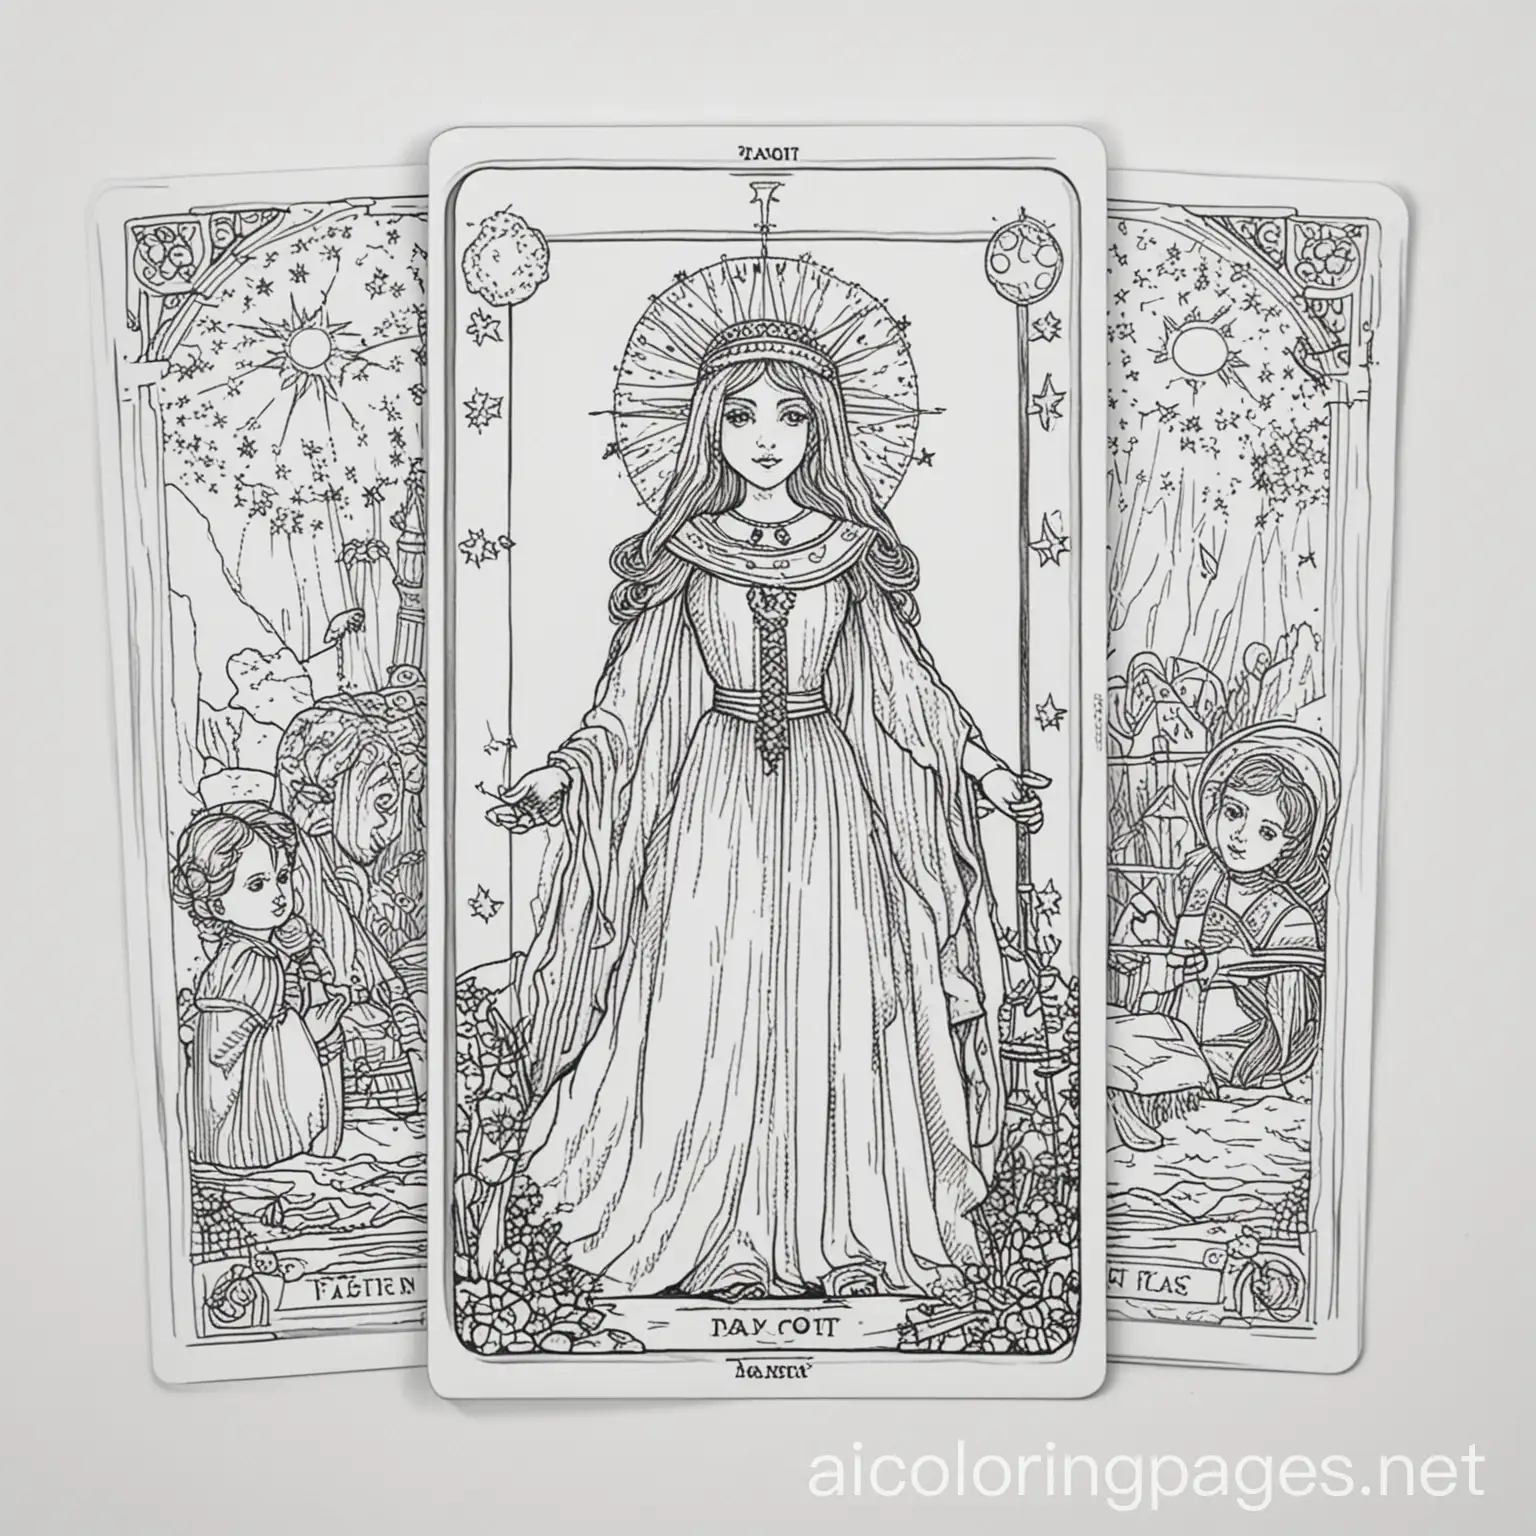 tarot cards, Coloring Page, black and white, line art, white background, Simplicity, Ample White Space. The background of the coloring page is plain white to make it easy for young children to color within the lines. The outlines of all the subjects are easy to distinguish, making it simple for kids to color without too much difficulty